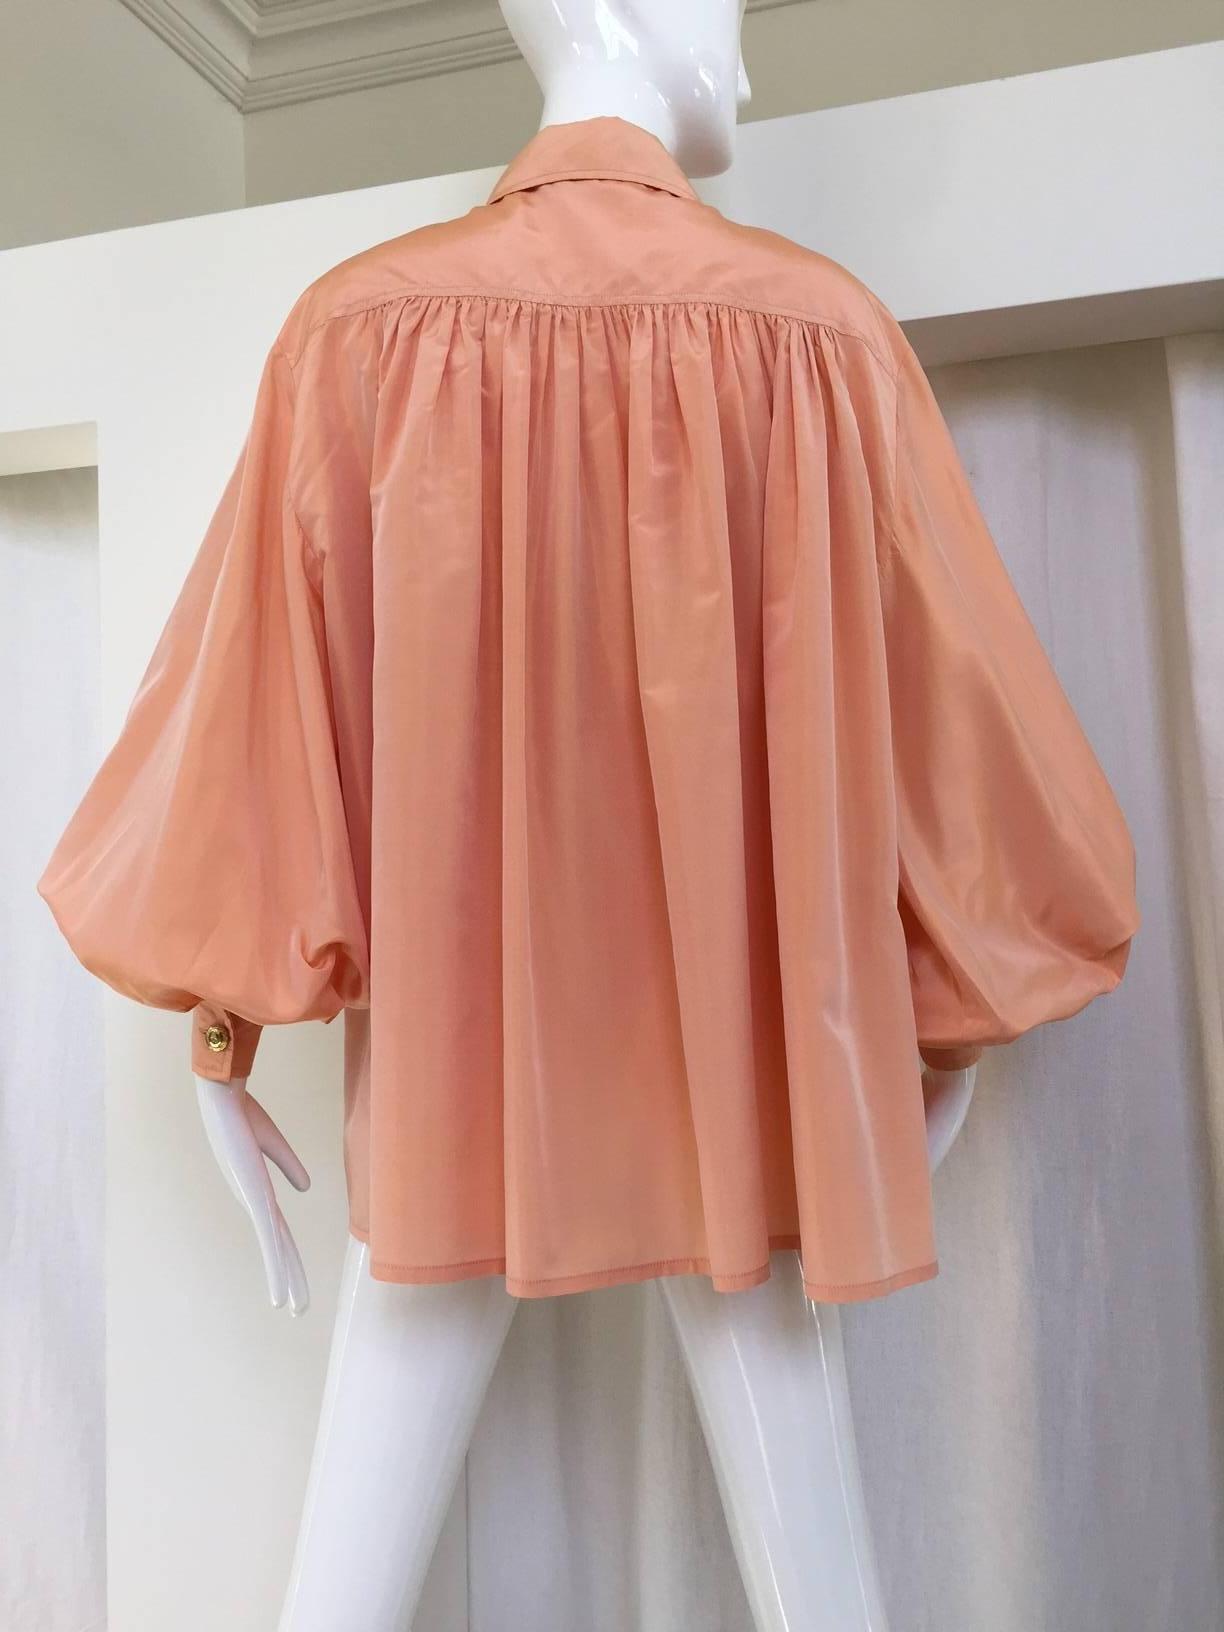 Vintage Christian Dior bishop sleeve peach silk blouse with dramatic big sleeves. Gold buttons. 
marked size: 42
Size: 8/ LARGE